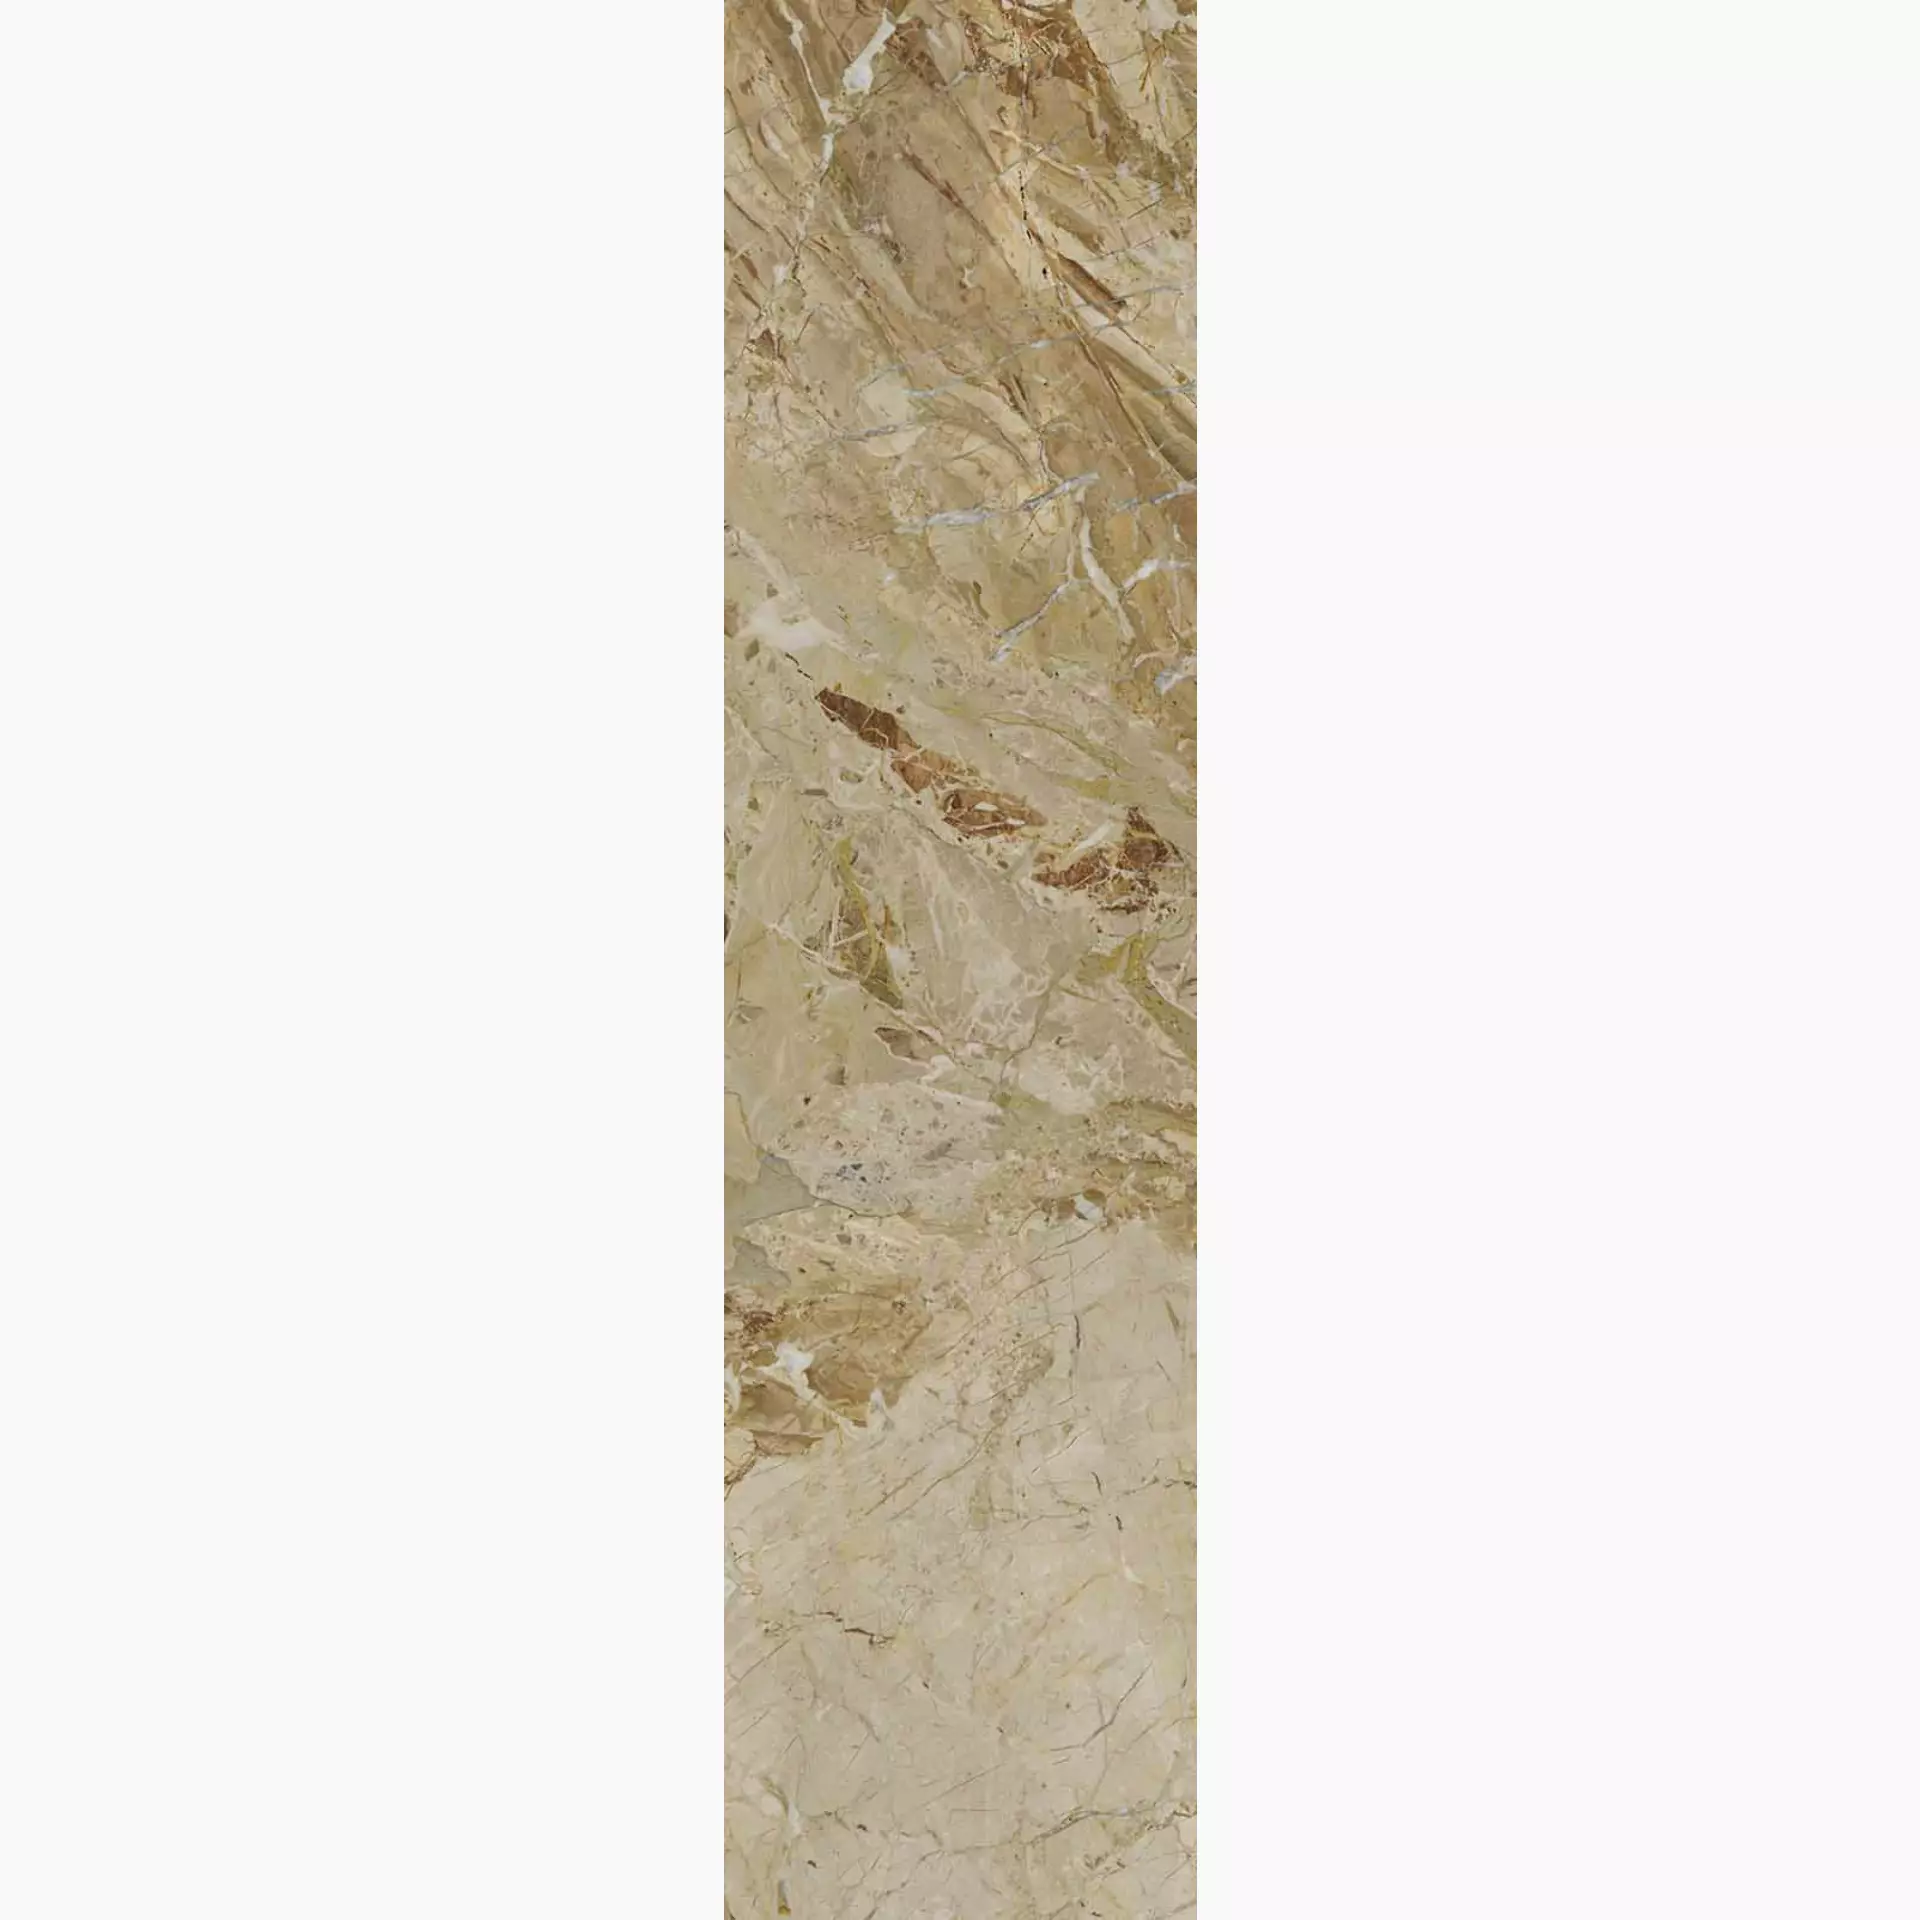 Keope 9Cento Aurora Beige Lappato 46394532 30x120cm rectified 9mm